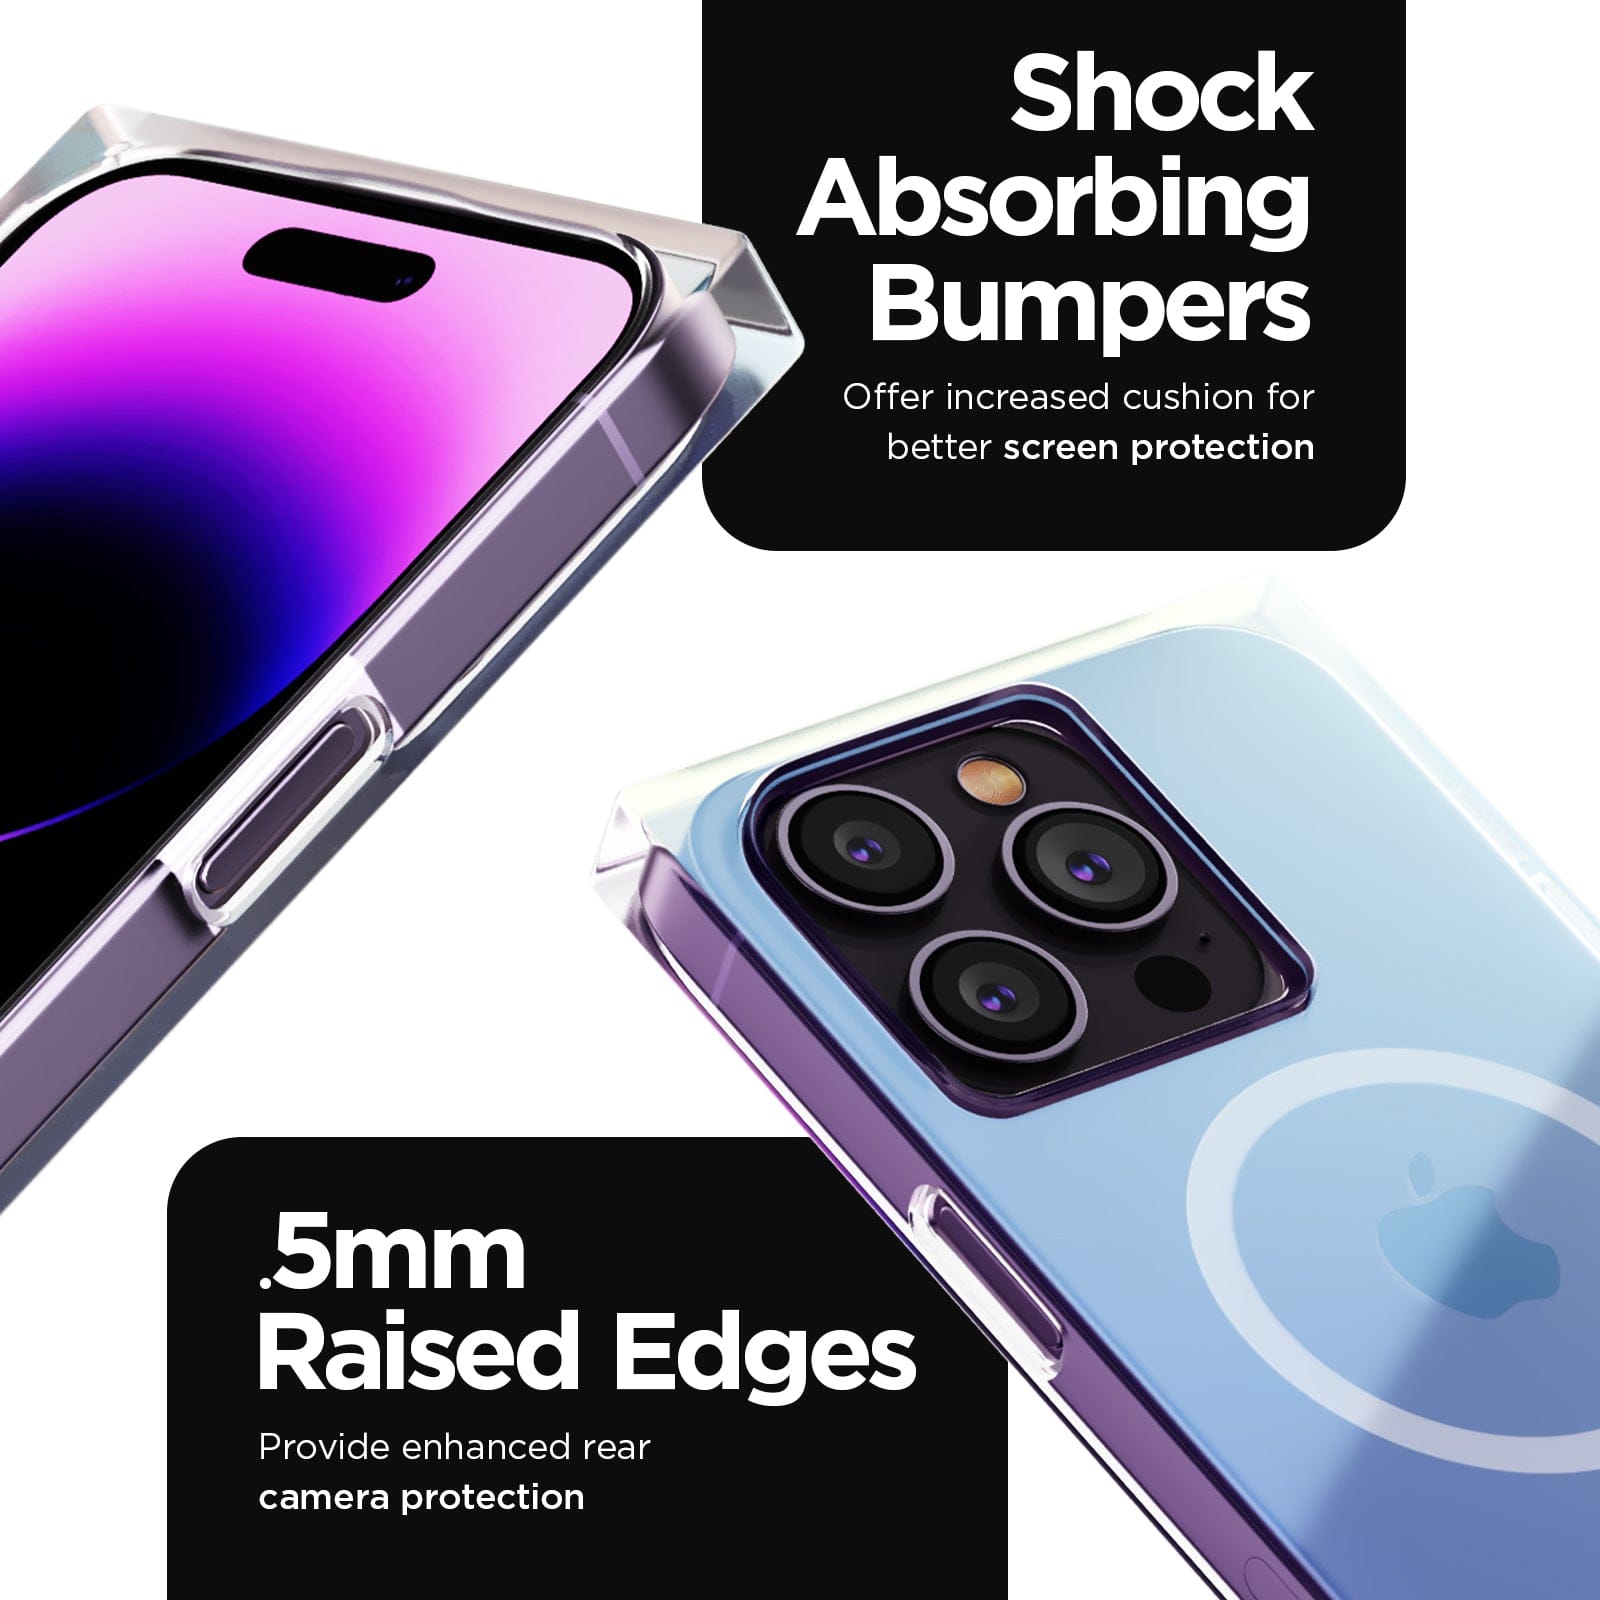 SHOCK ABSORBING BUMPERS. OFFER INCREASED CUSHION FOR BETTER SCREEN PROTECTION. .5MM RAISED EDGES PROVIDE ENHANCED REAR CAMERA PROTECTION. 